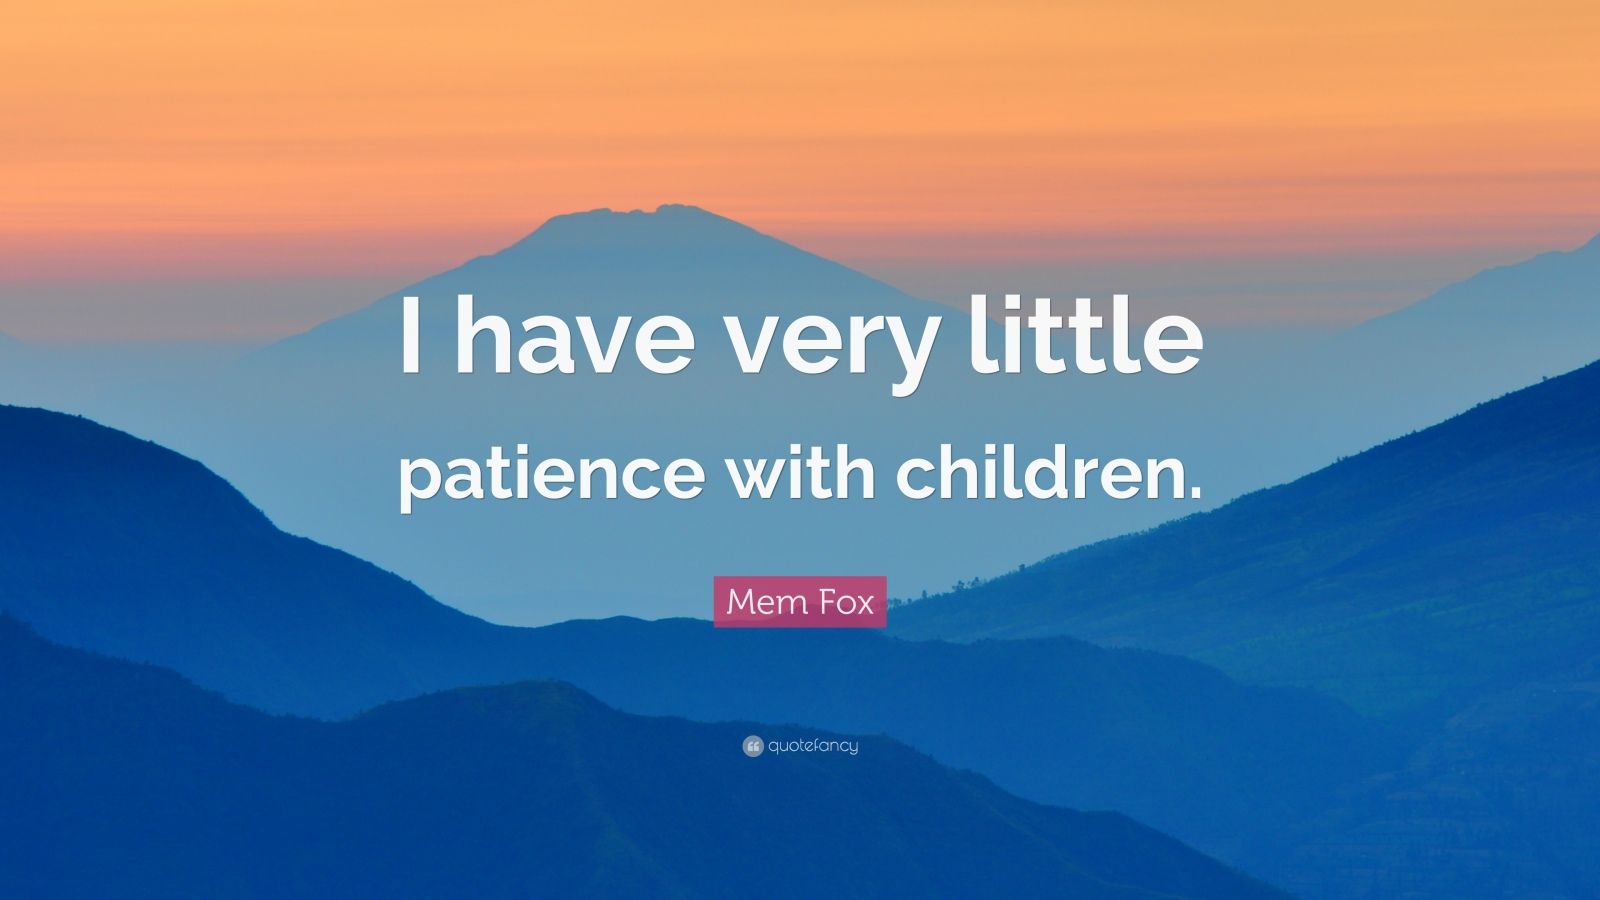 Mem Fox Quote: “I have very little patience with children.”